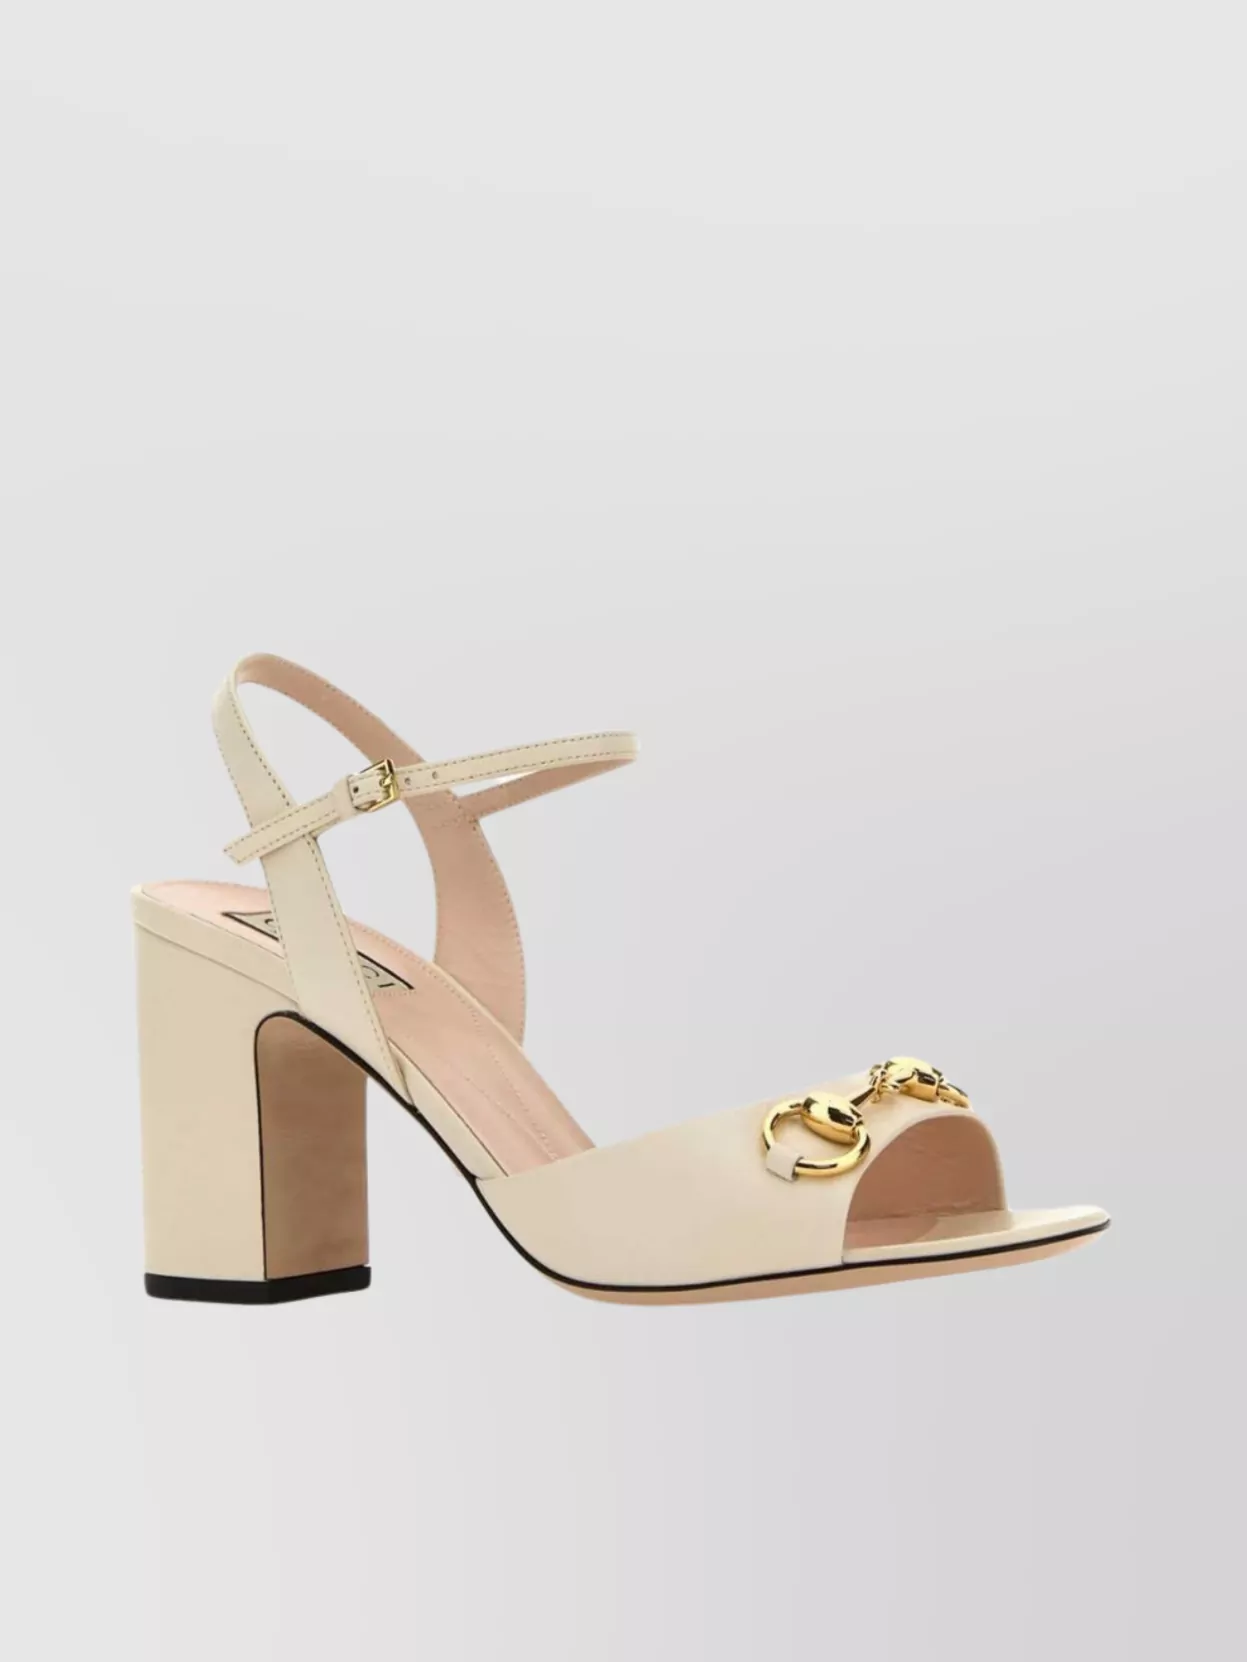 Gucci Leather Sandals With Block Heel And Metallic Accent In Neutral